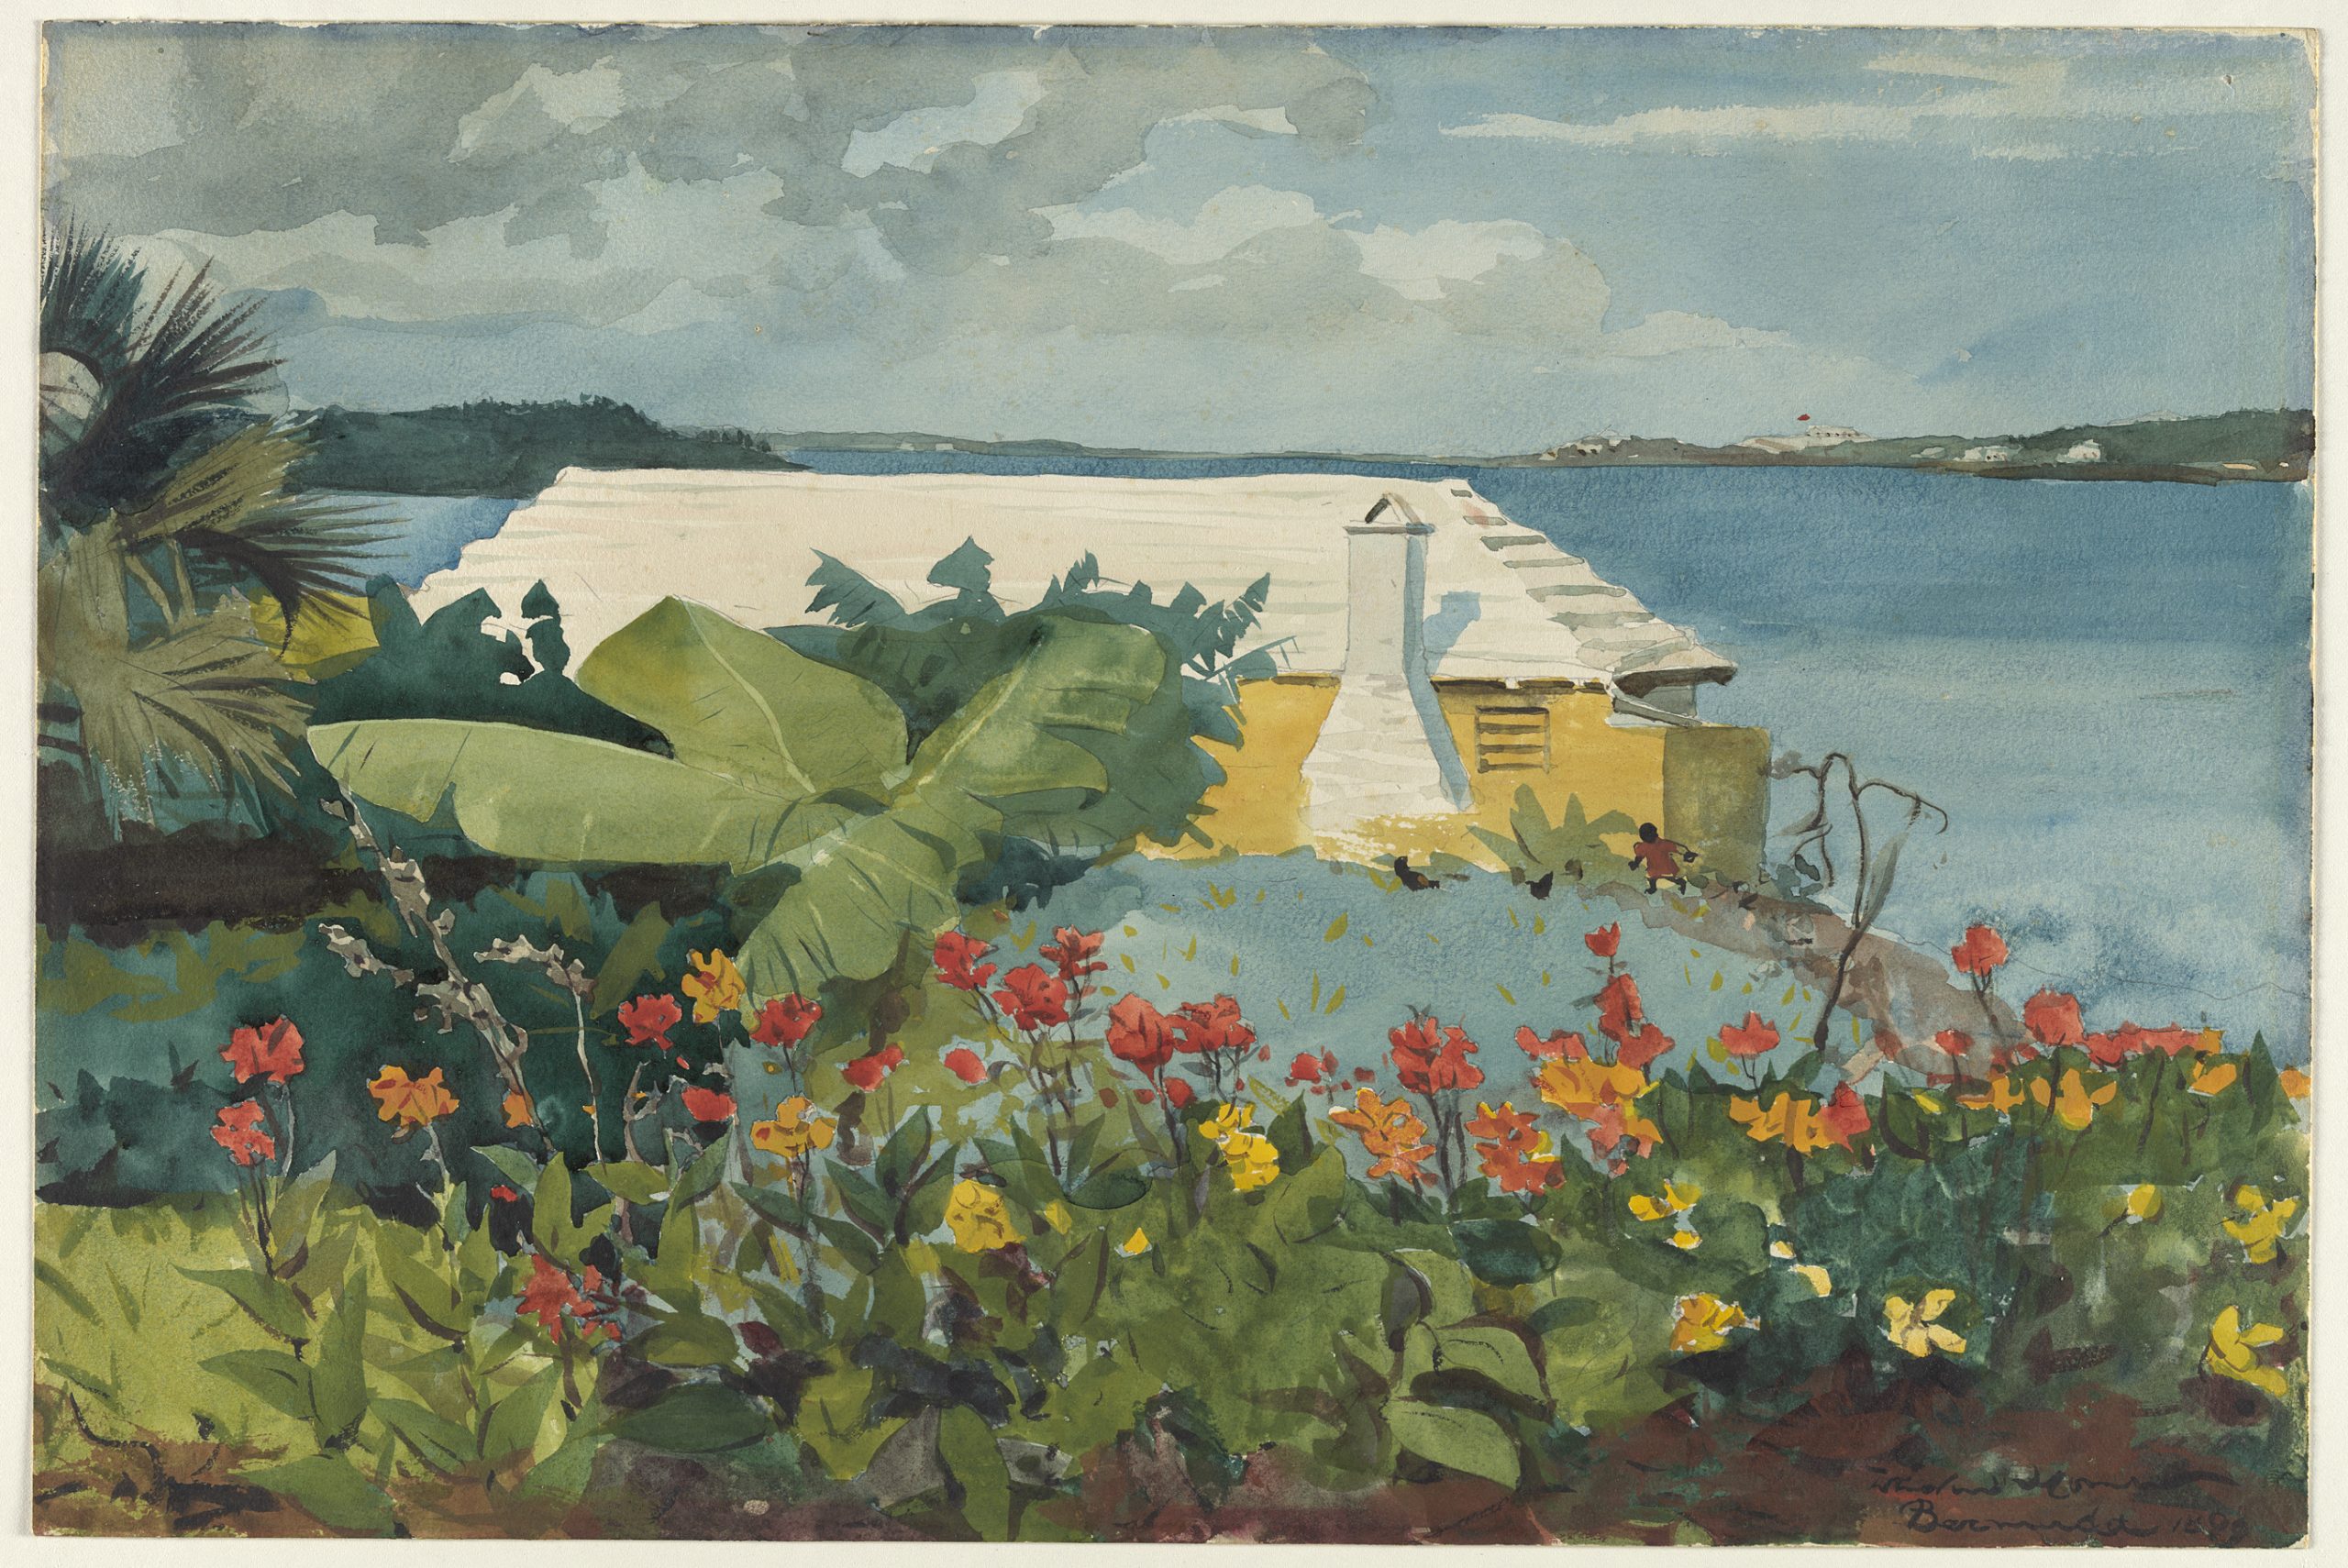 Winslow Homer Flower Garden and Bungalow, Bermuda, 1899, Watercolour and graphite on off-white wove paper, 35.4 x 53.2 cm, The Metropolitan Museum of Art, New York
Amelia B. Lazarus Fund, 1910 10.228.10
© The Metropolitan Museum of Art, New York